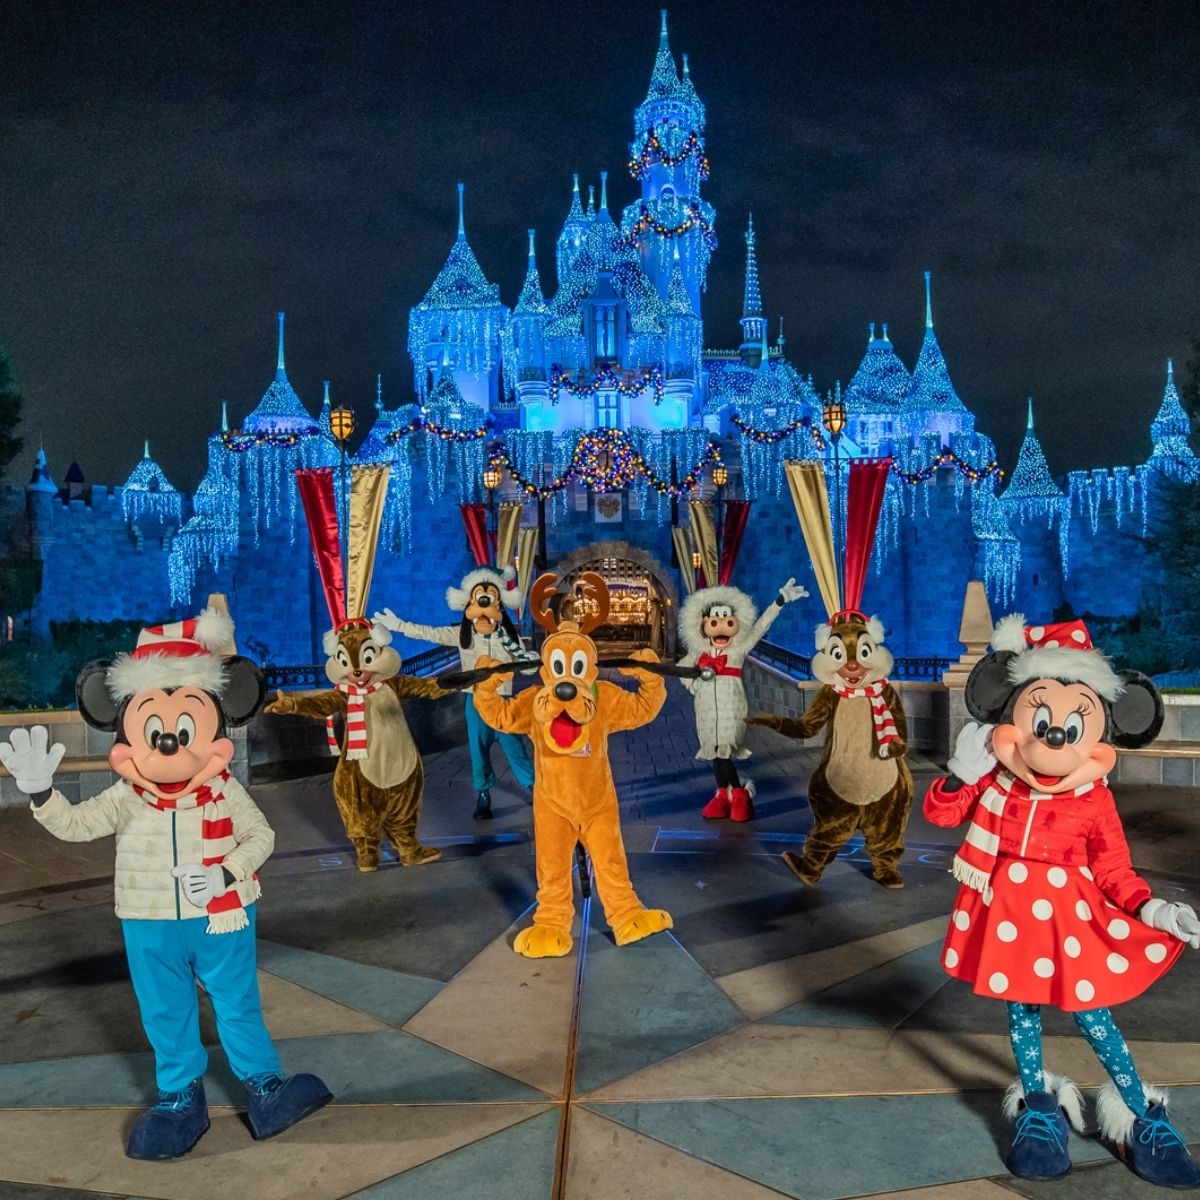 Mickey, Minnie and friends on holiday attire